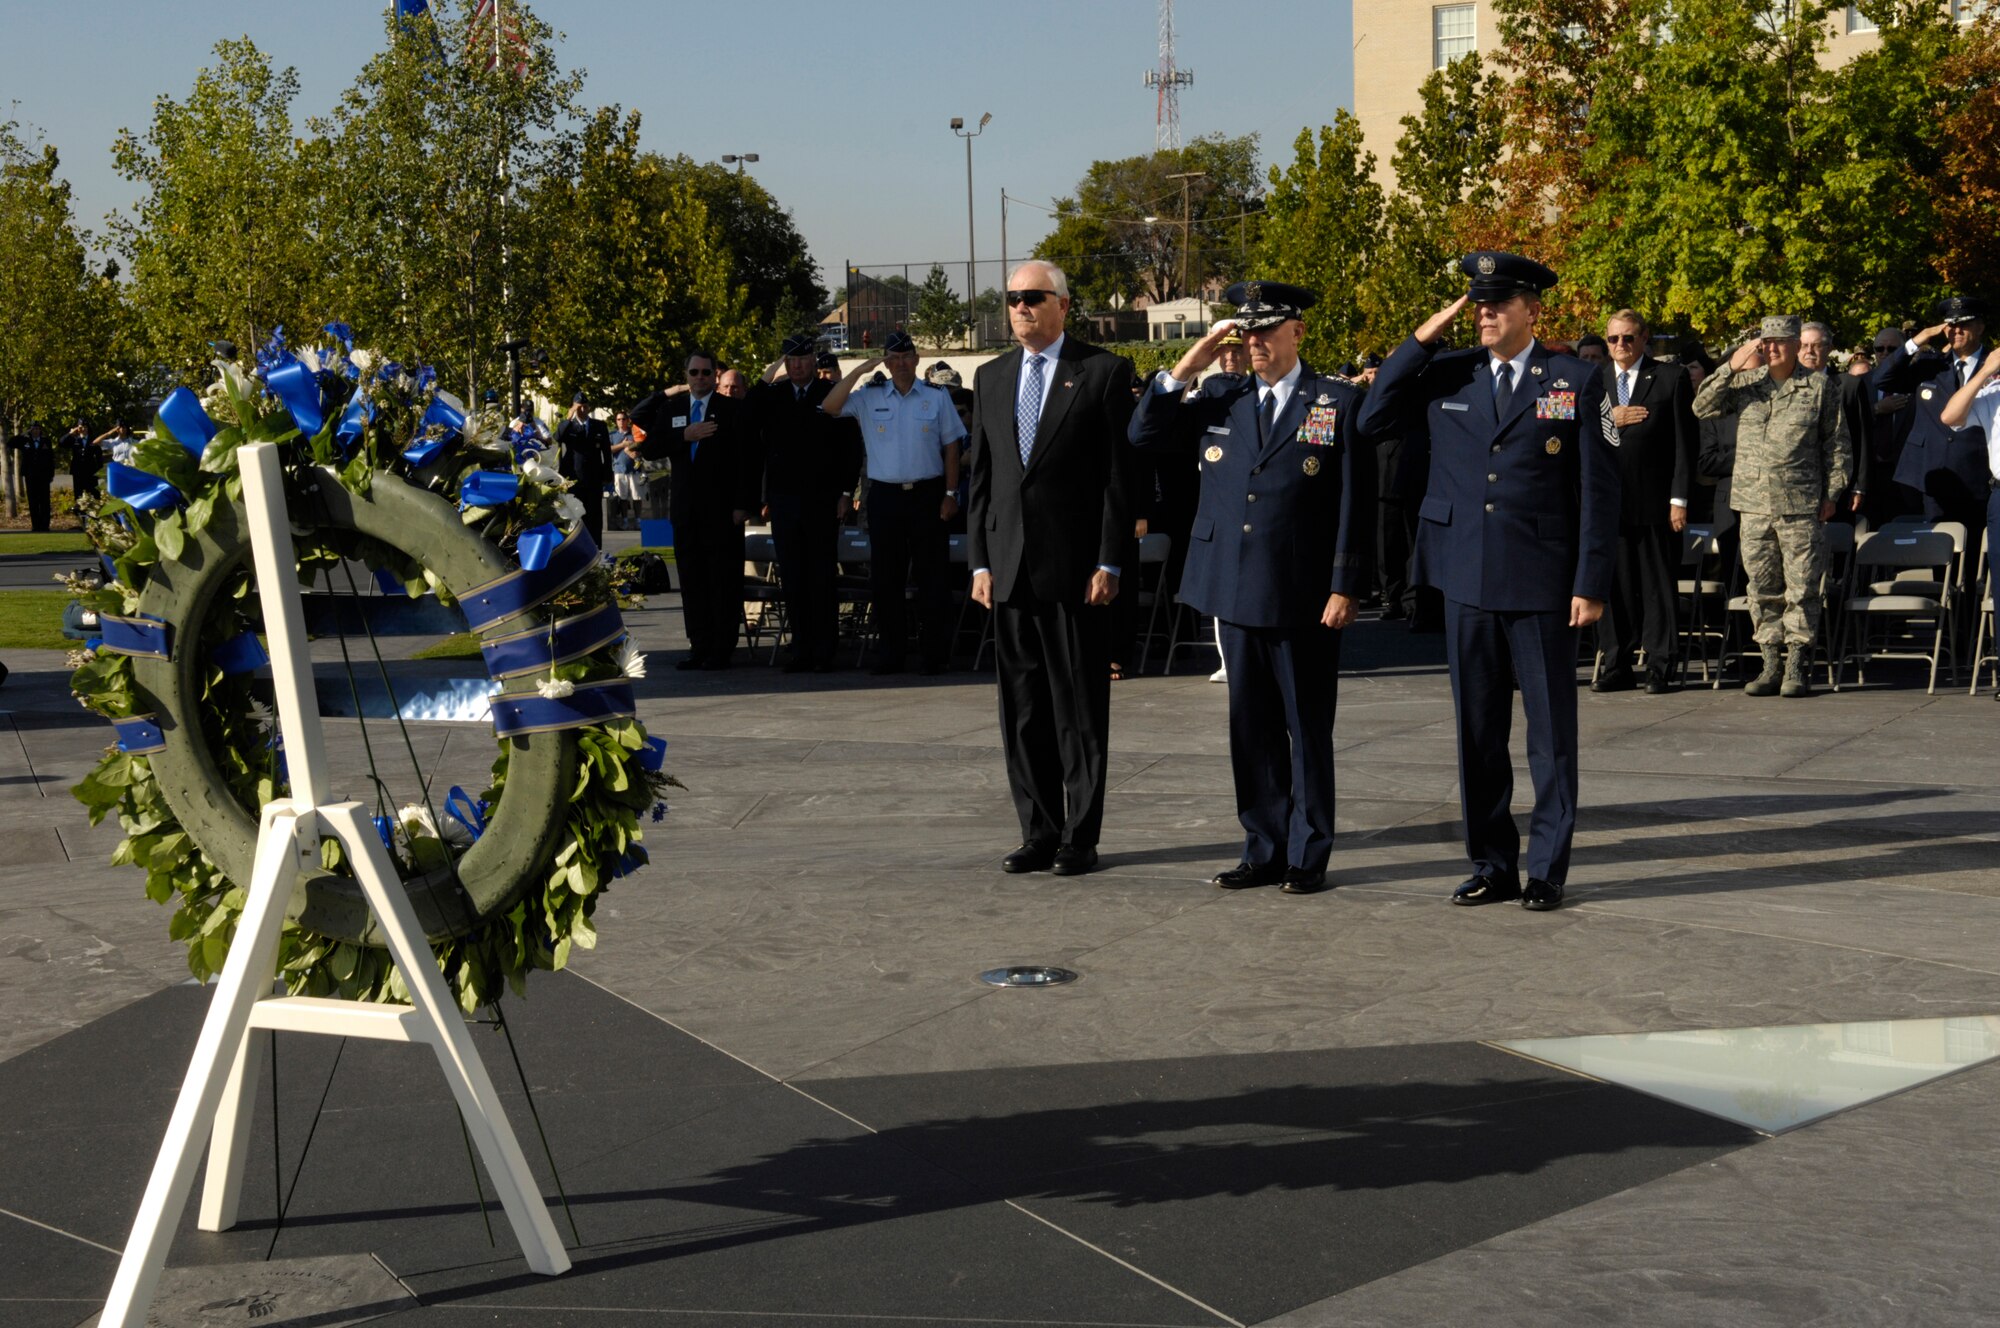 Secretary of the Air Force Michael W. Wynne, Air Force Chief of Staff Gen. T. Michael Moseley, and Chief Master Sgt. of the Air Force (CMSAF) Rodney J. McKinley pay respects to the wreath in honor of this years’ 60th Anniversary of the Air Force Sept. 18, at the Air Force Memorial in Washington.  Throughout the year, many bases have held their own ceremonies to celebrate its birthday.  Member’s from all over the National Capitol Region were here to celebrate this event and be apart of Air Force History. (U.S. Air Force photo by Senior Airman Rusti Caraker)(Released)